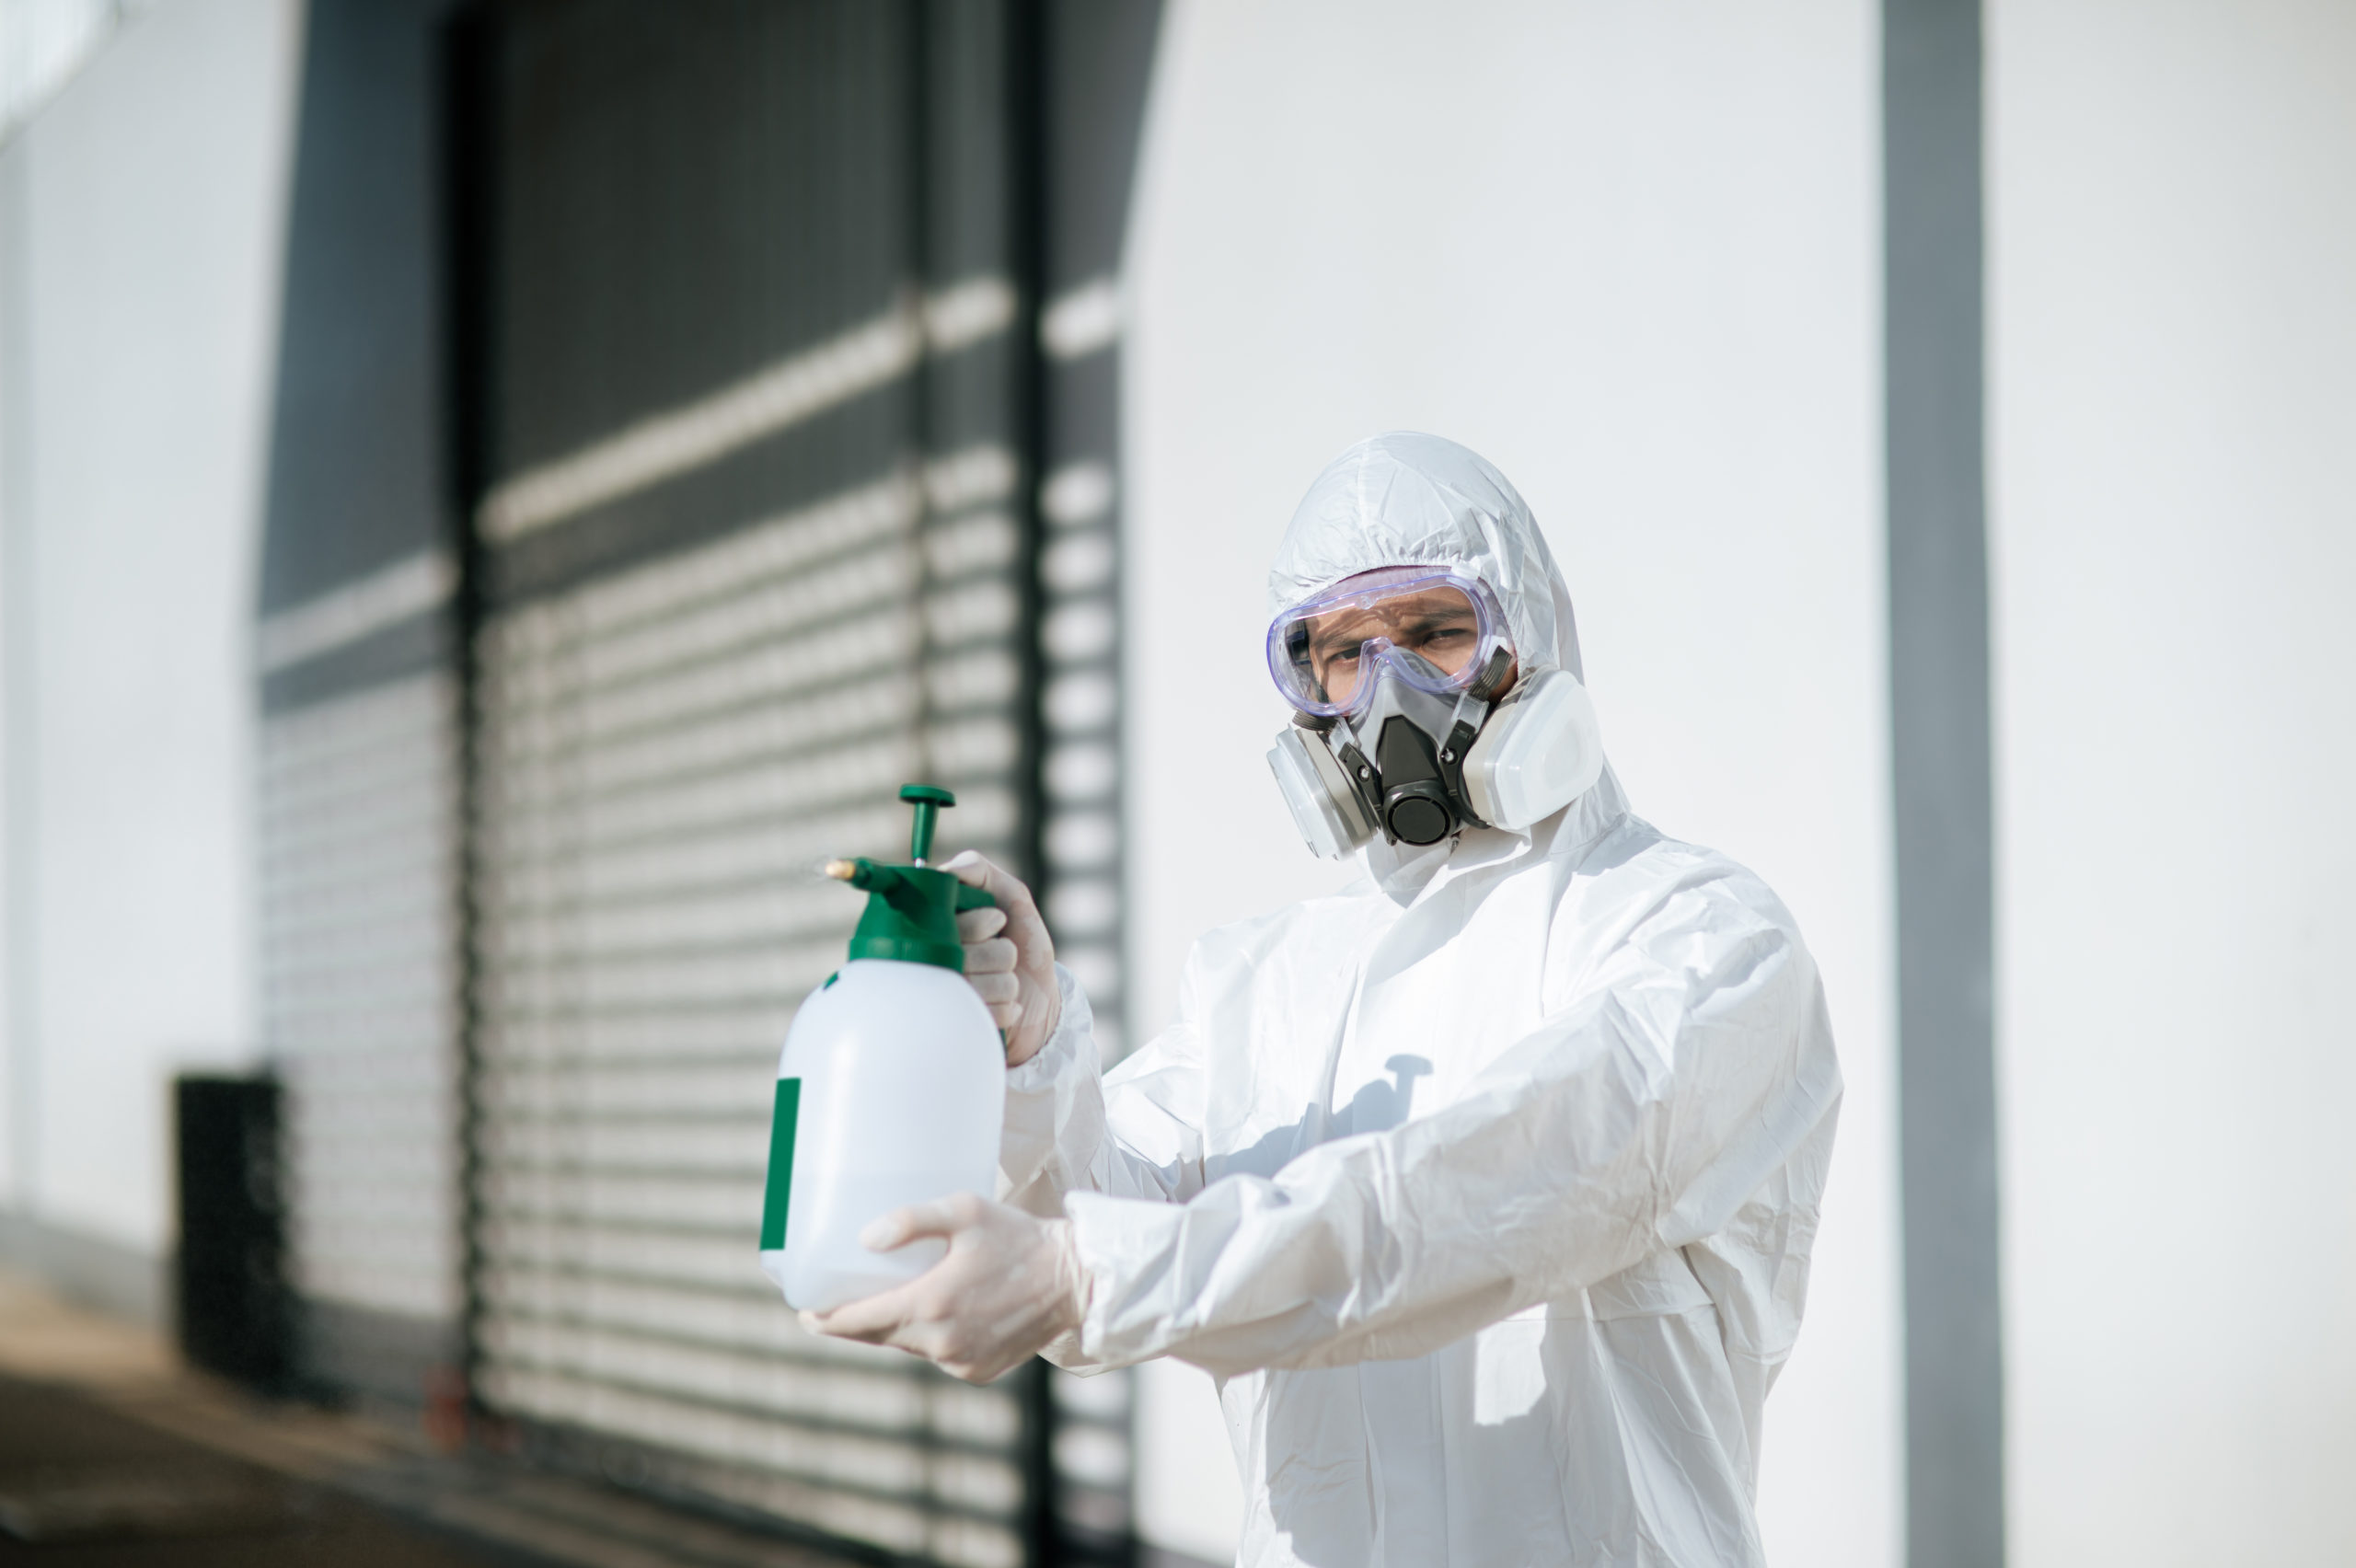 Disinfection specialist in PPE suit performing public decontamin